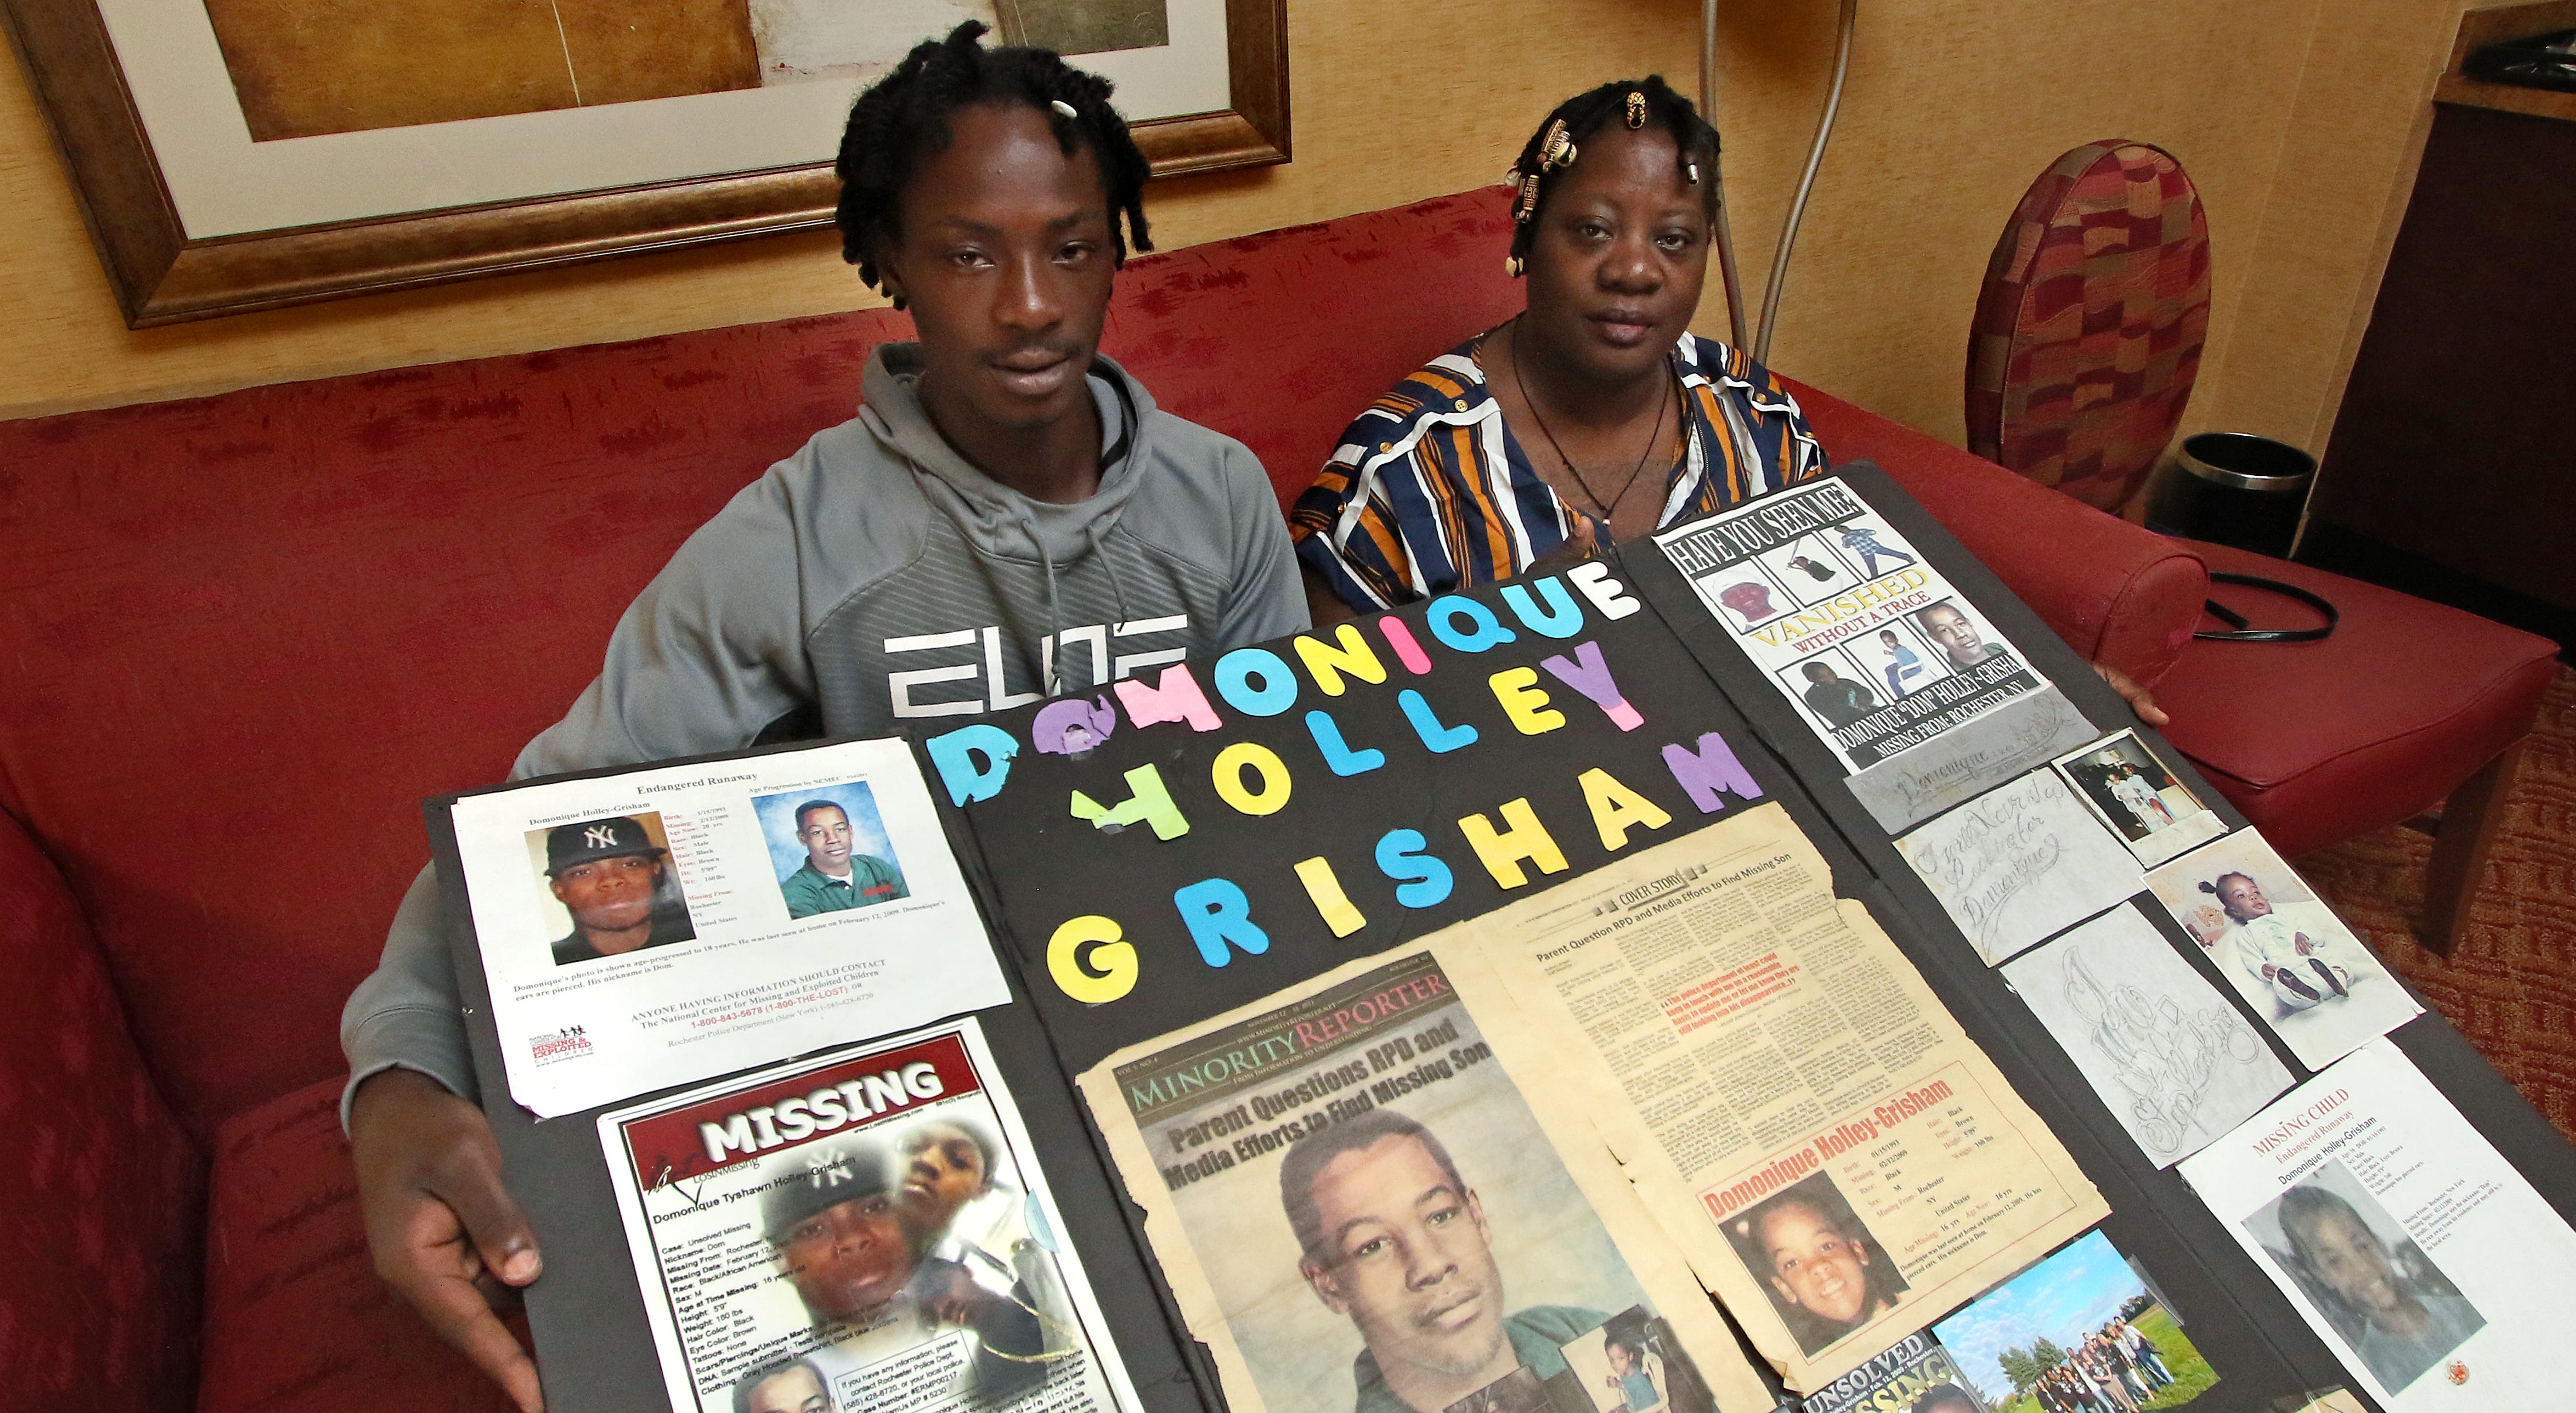 Jaquan Holley-Grisham and his mother, Mozell Jones-Grisham, with a poster of Domonique Holley-Grisham, who disappeared in 2009 at 16.